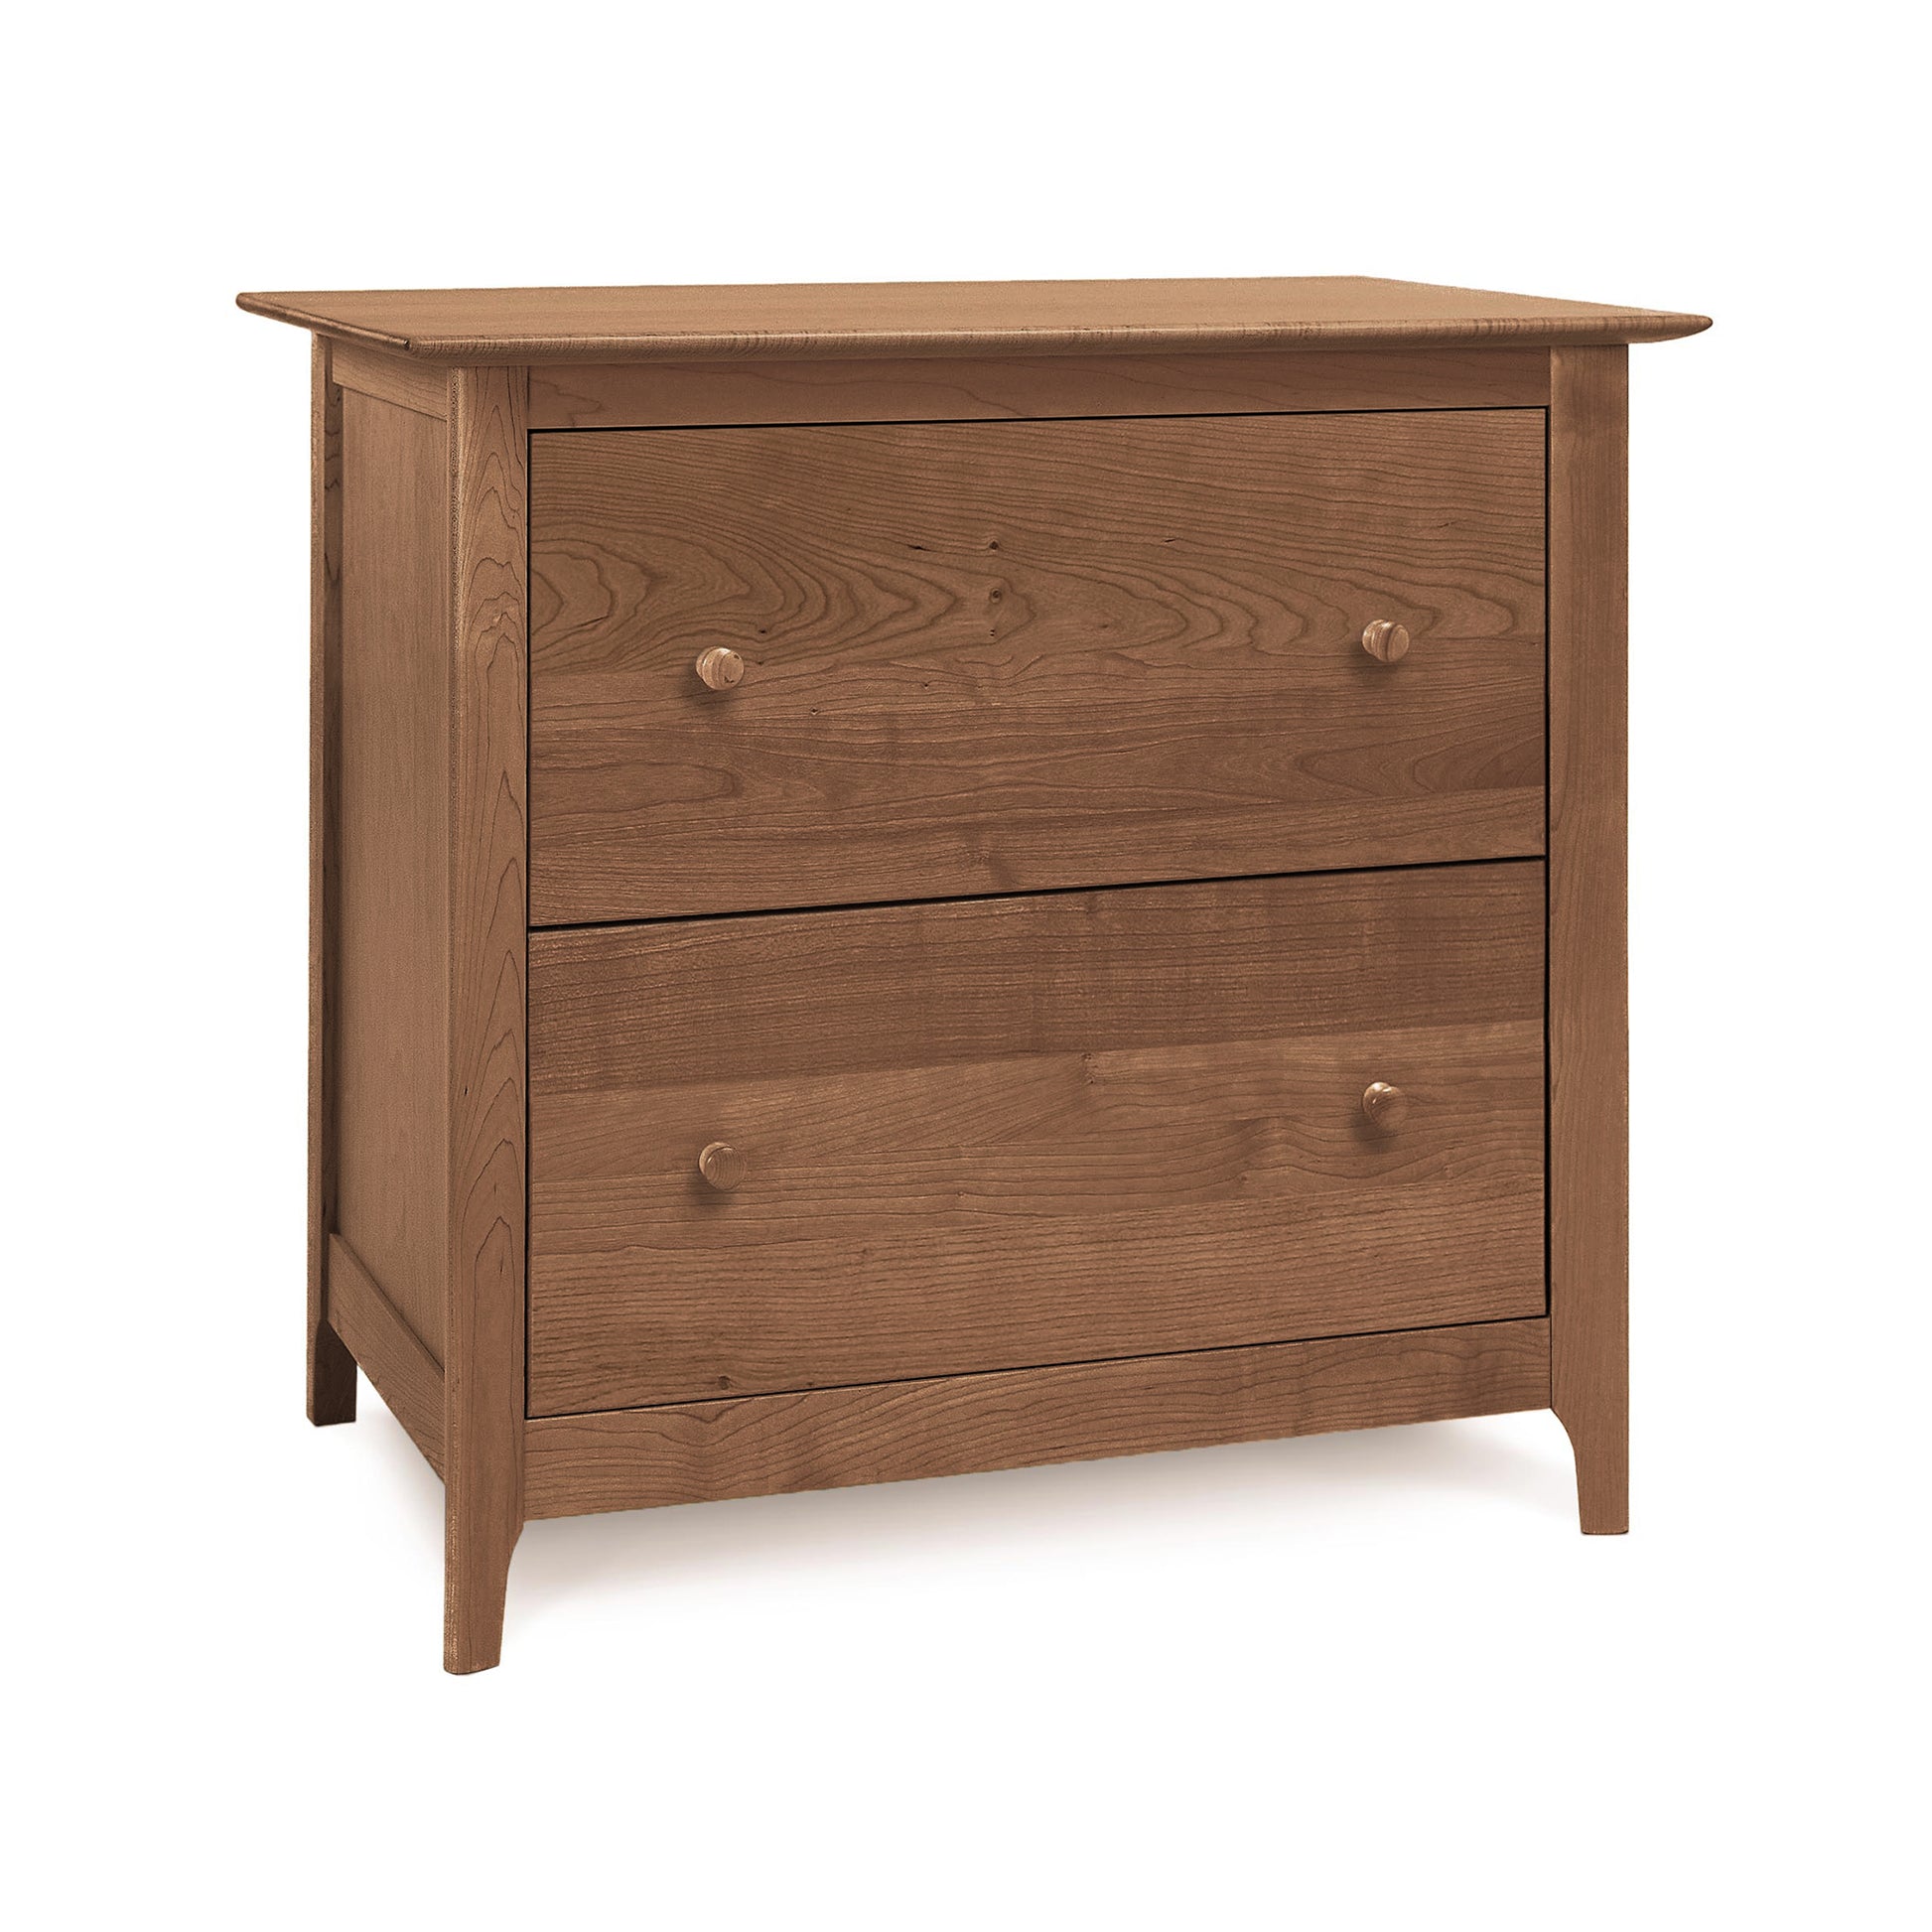 A Sarah Lateral Filing Cabinet by Copeland Furniture with two drawers, isolated on a white background.